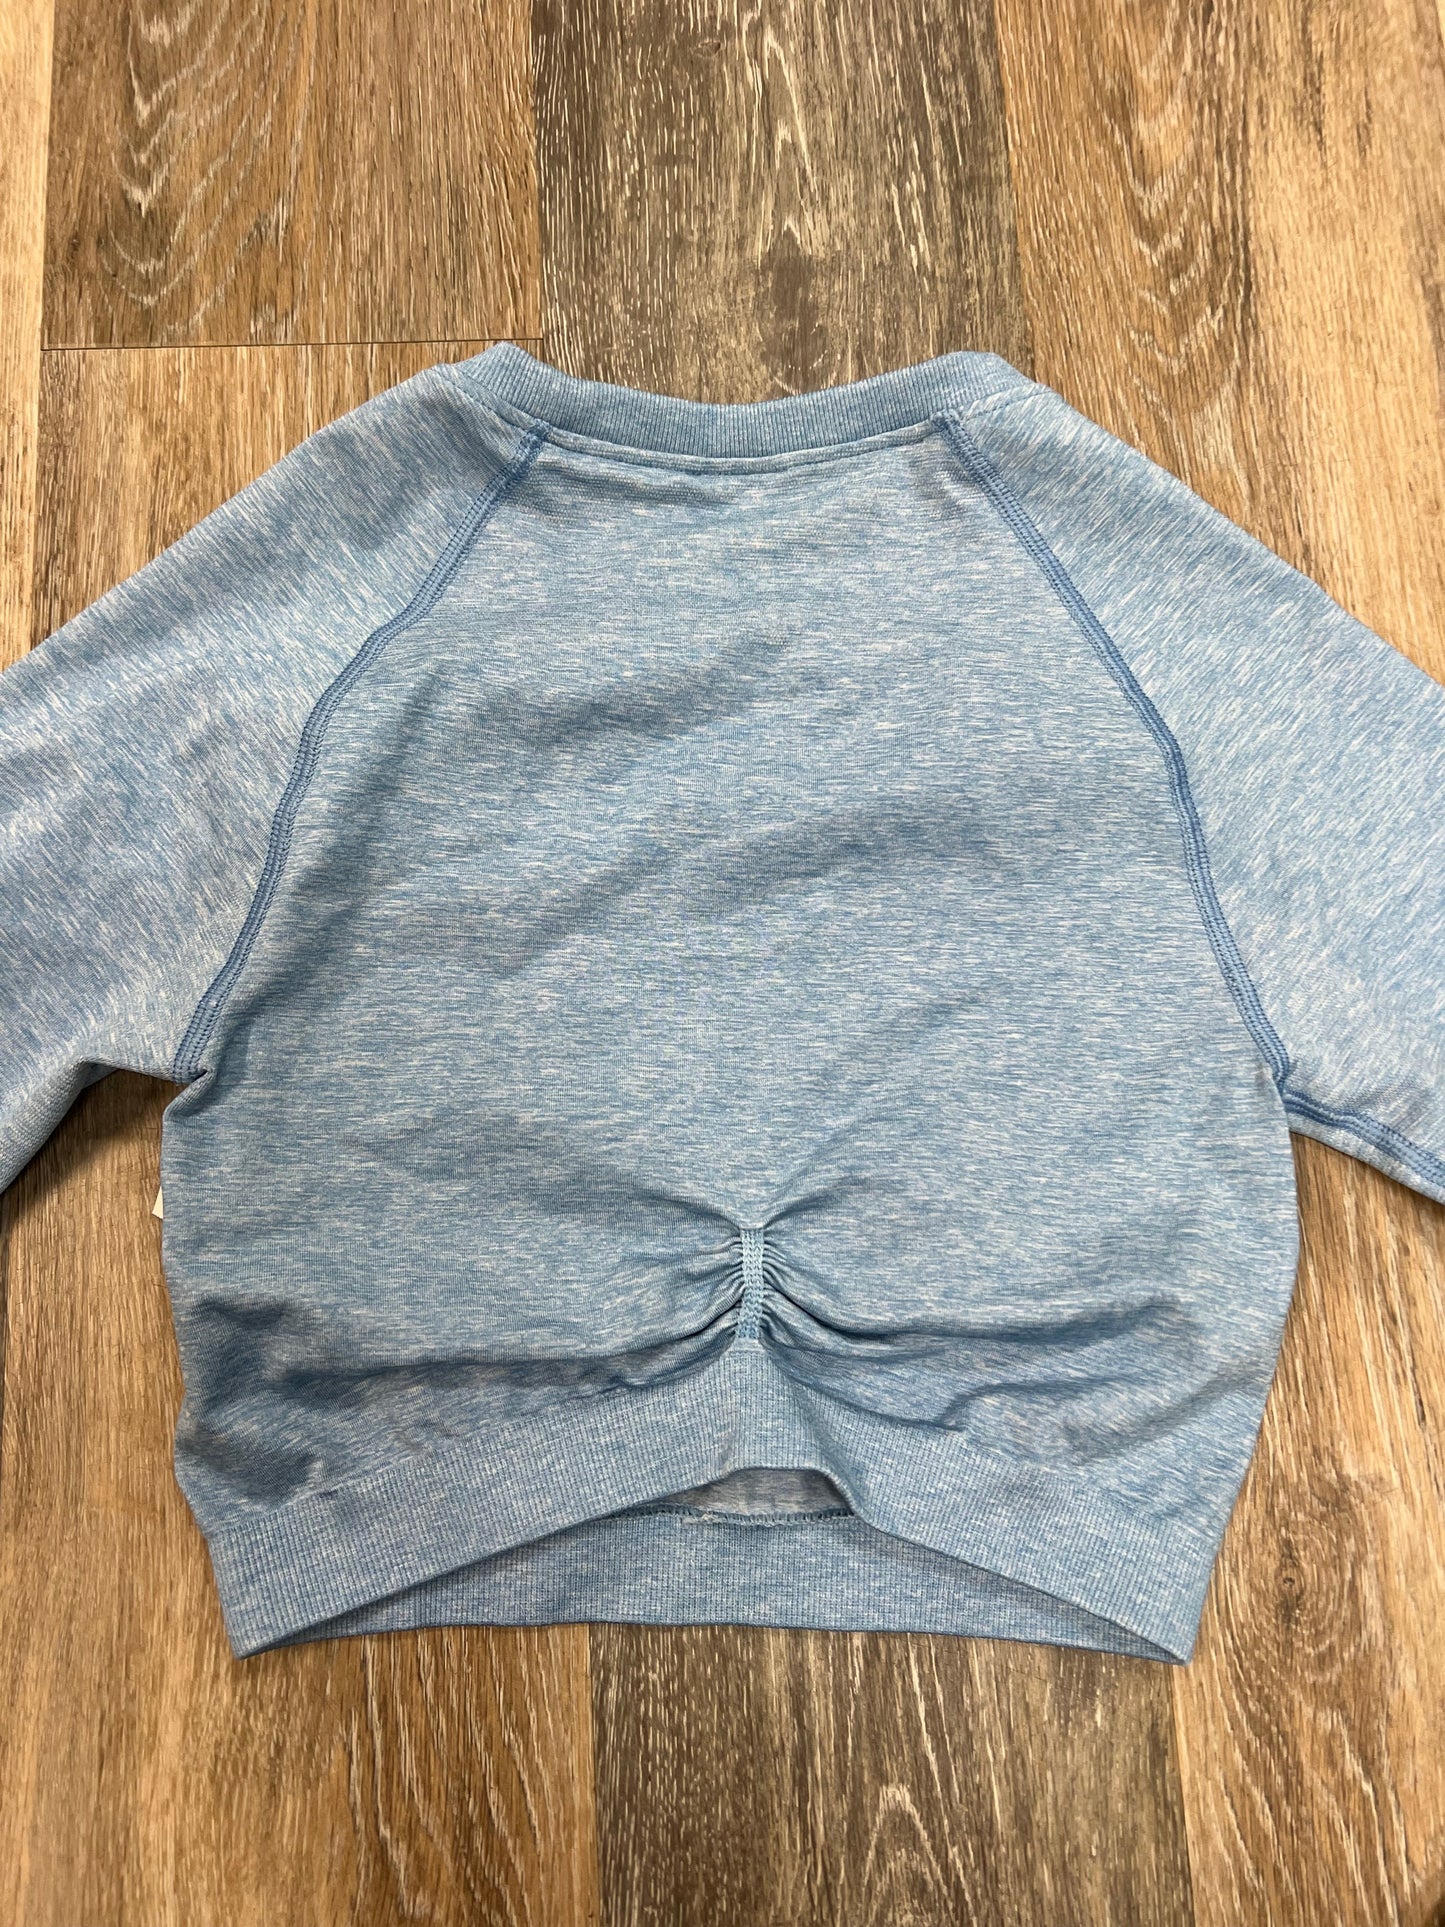 Athletic Top Long Sleeve Crewneck By Gym Shark  Size: S